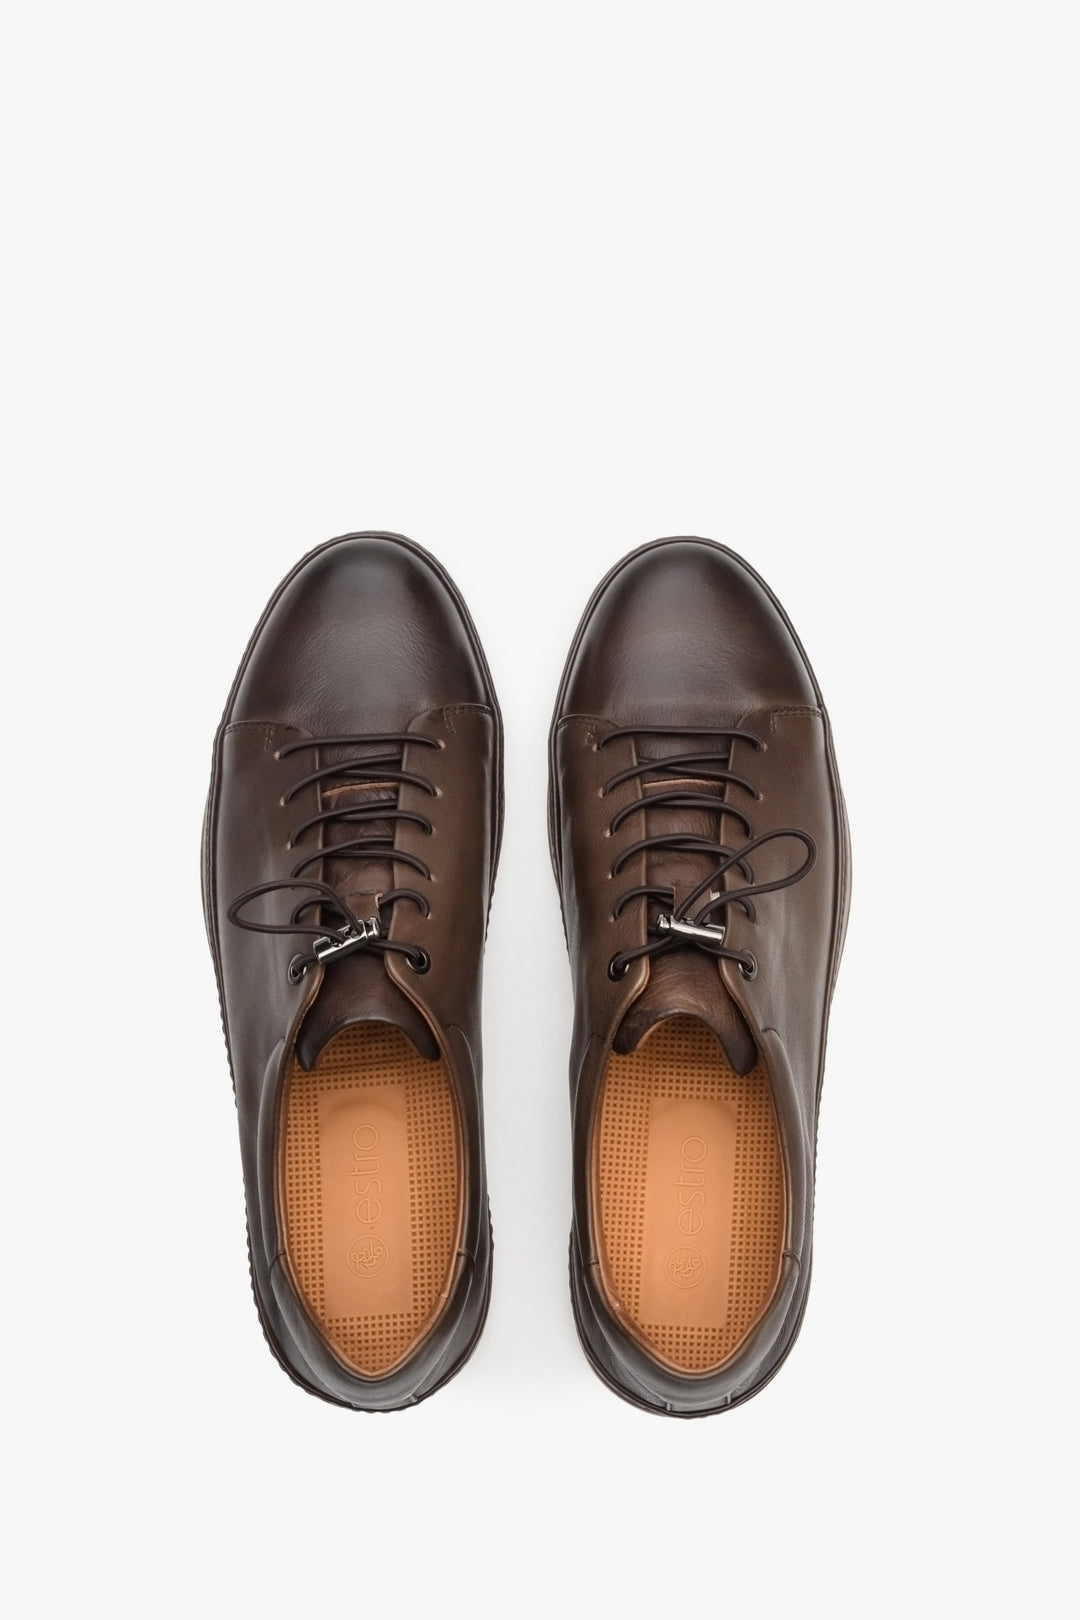 Men's brown sneakers made of genuine leather - top view model presentation.